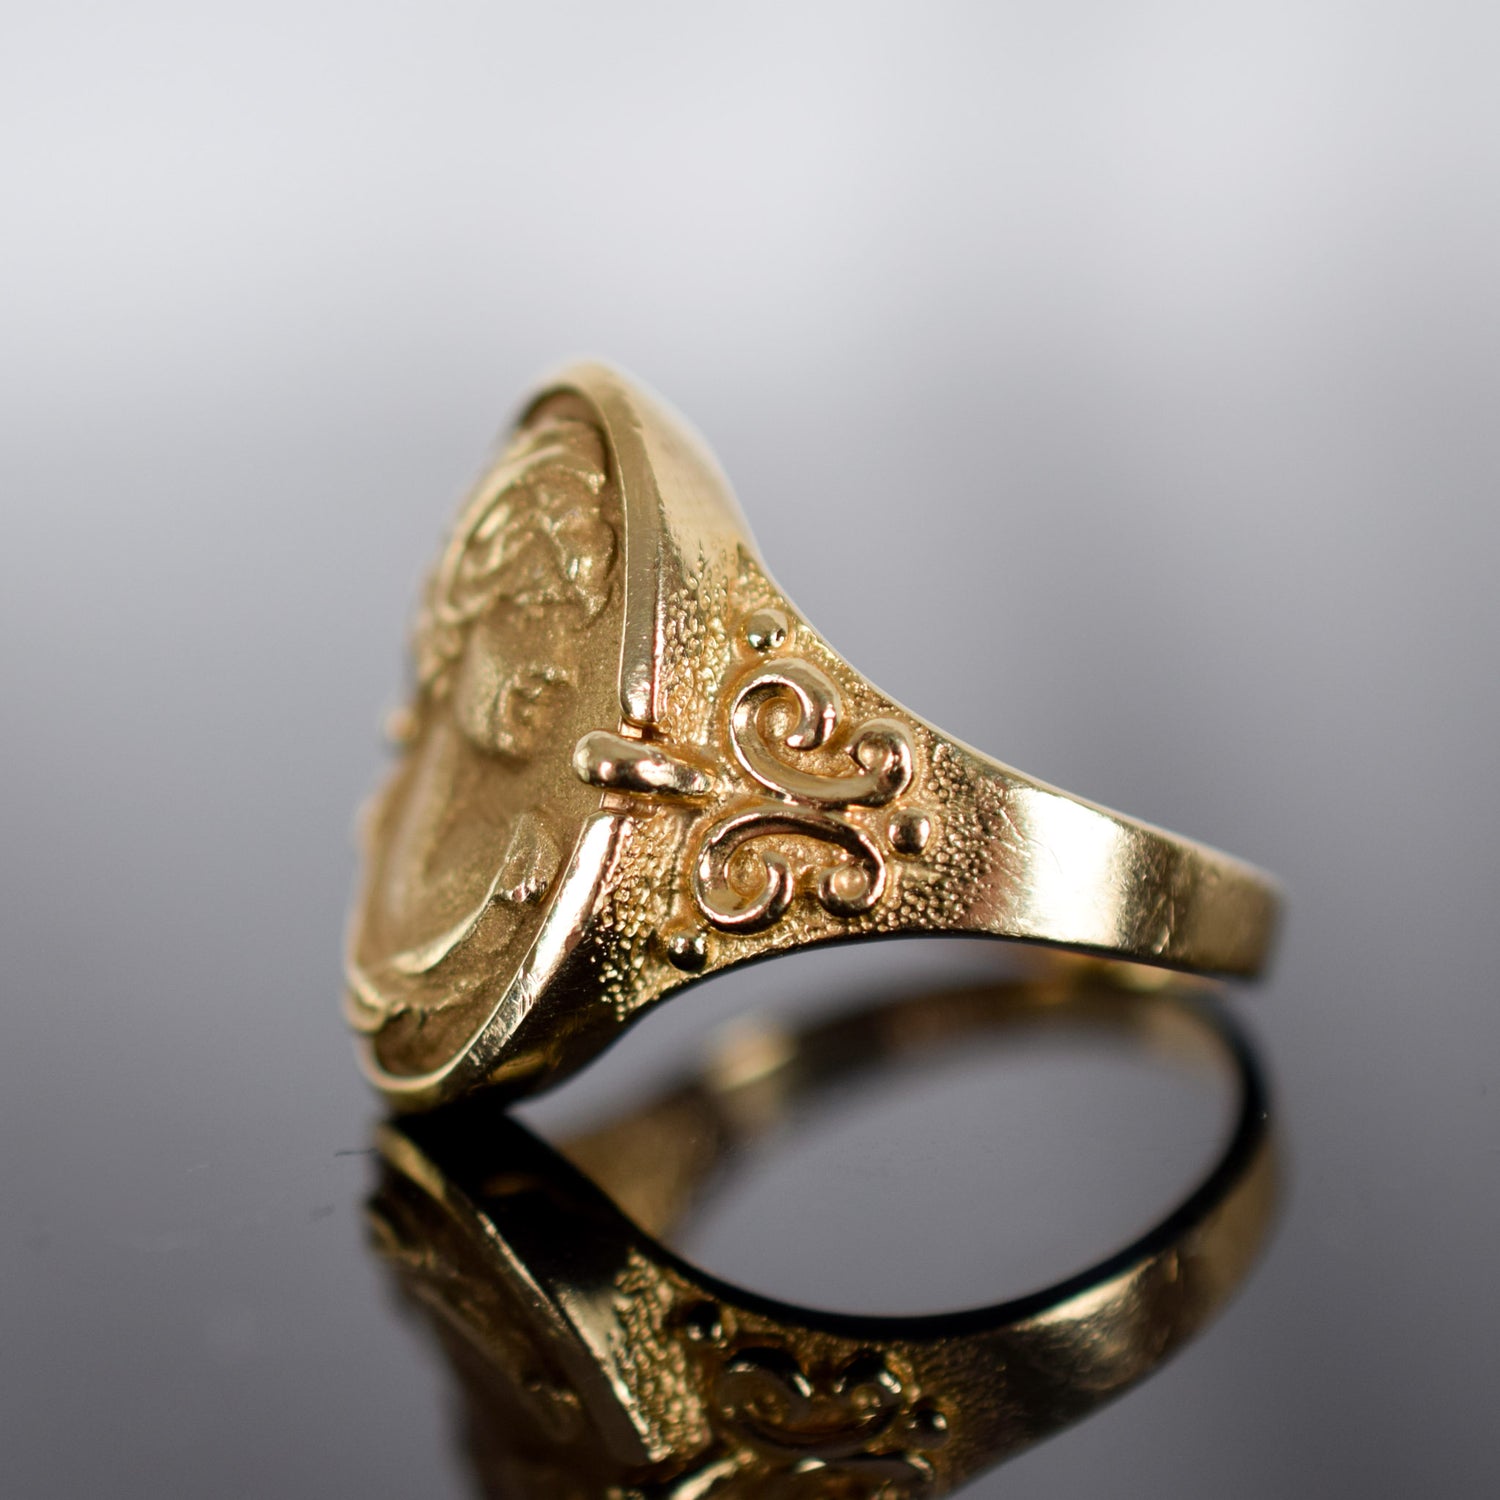 Antique gold cameo ring, folklor 